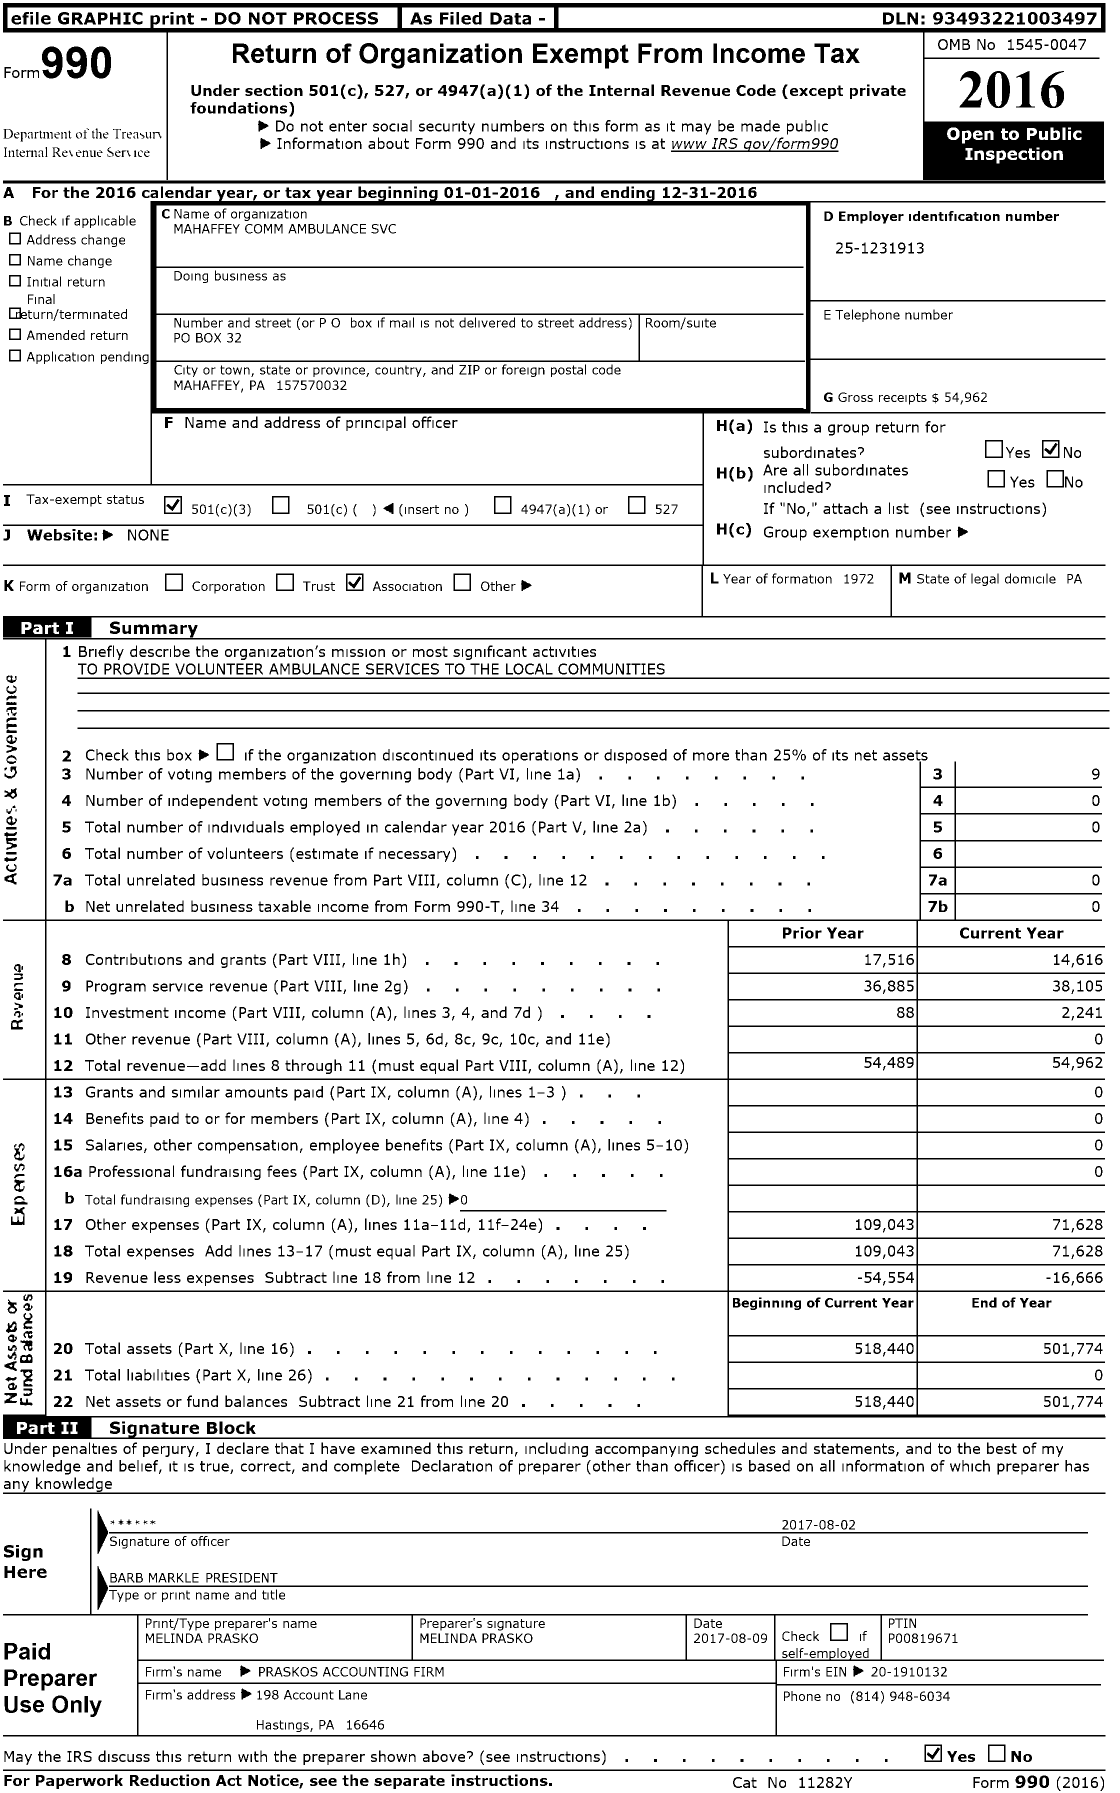 Image of first page of 2016 Form 990 for Mahaffey Comm Ambulance Service